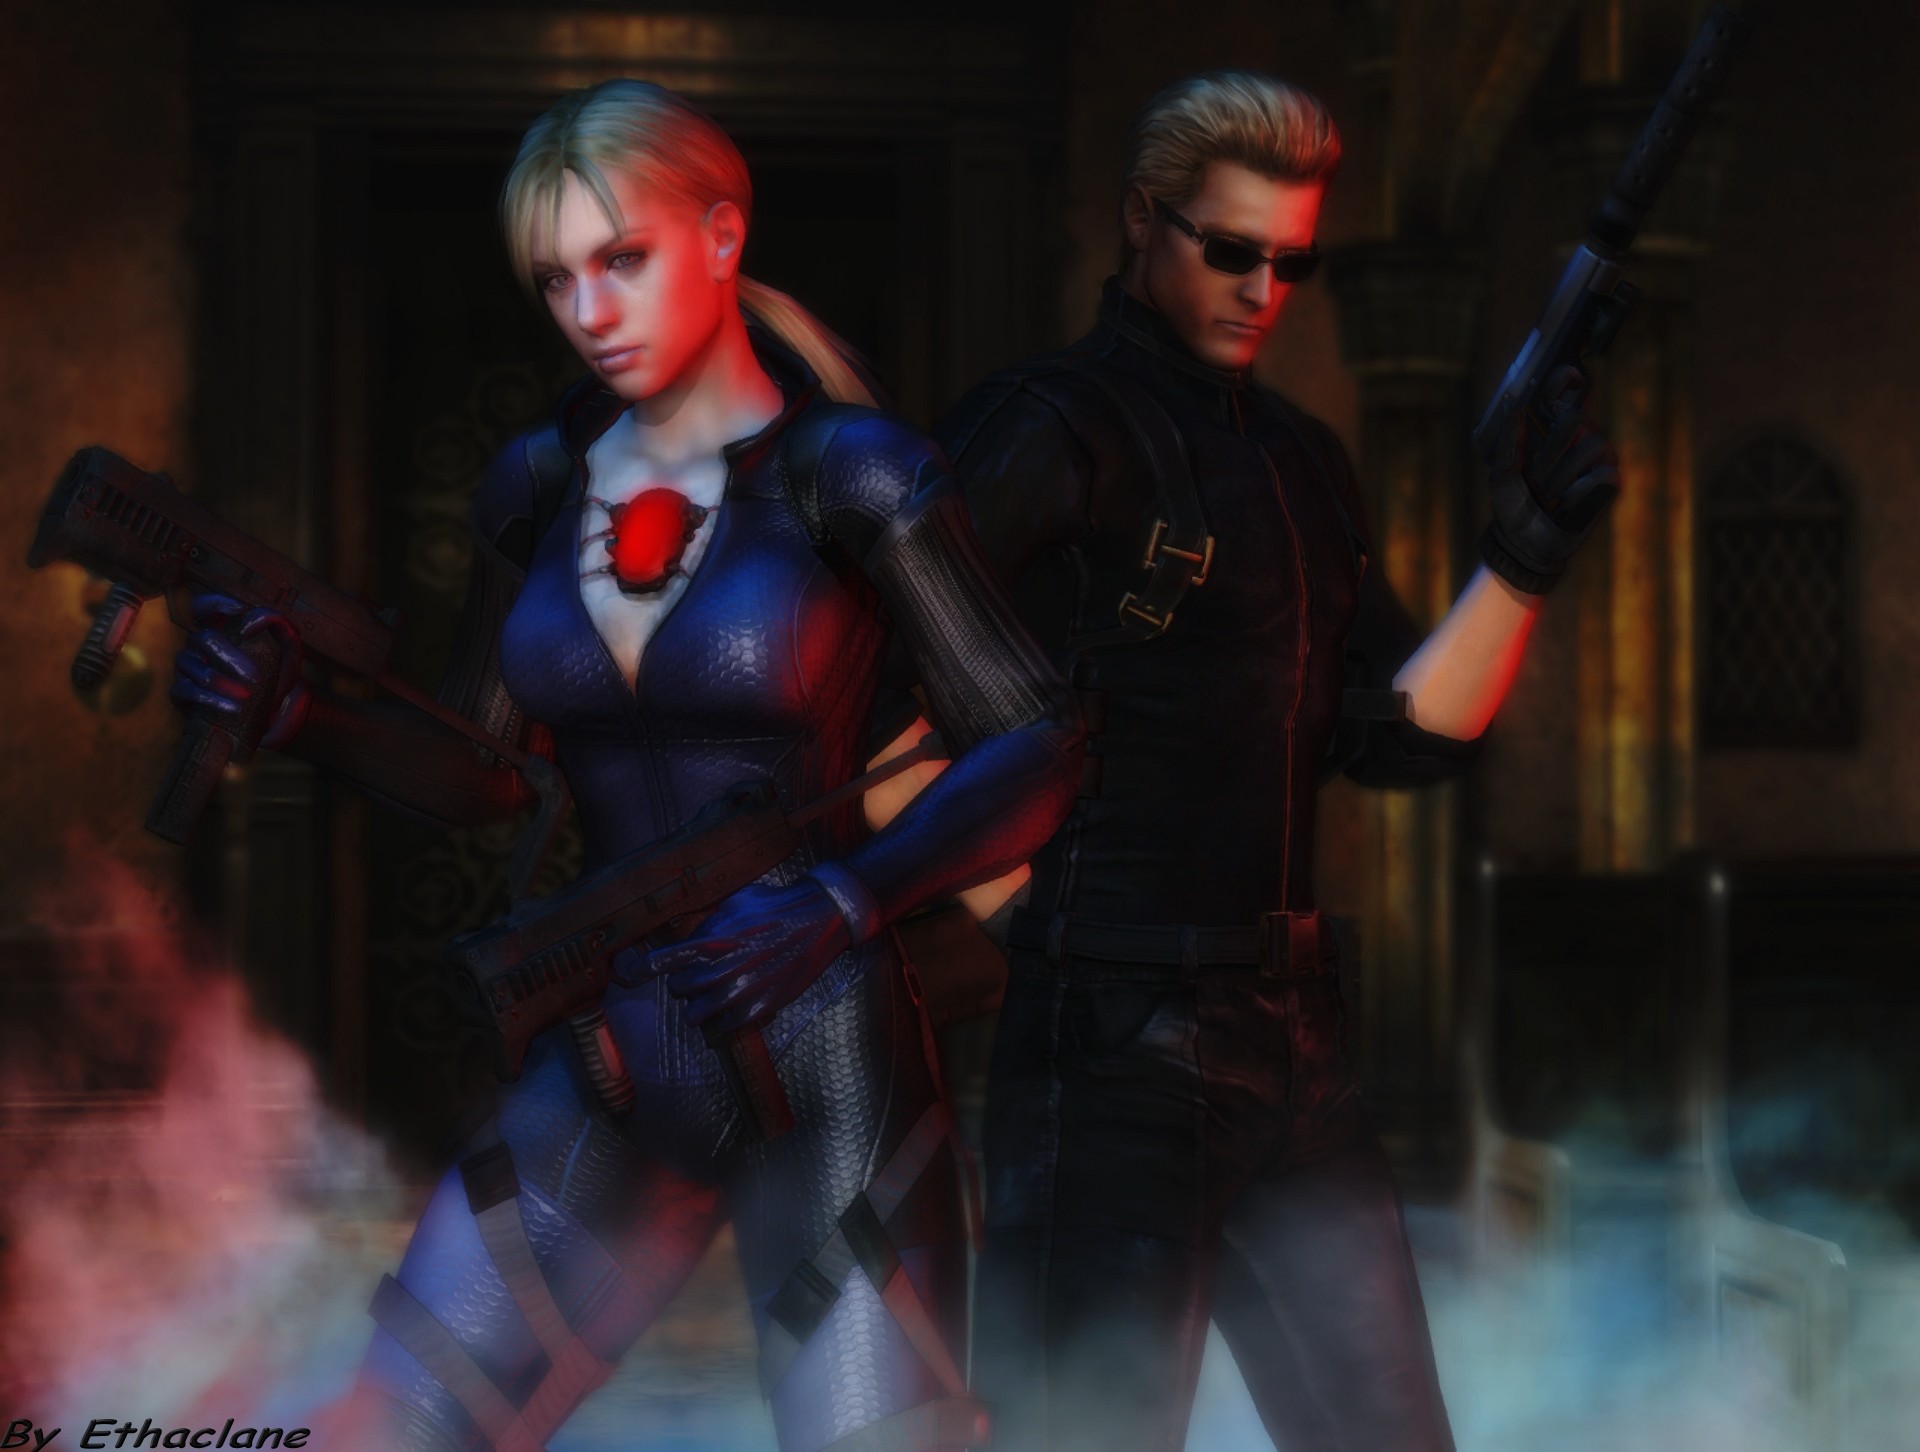 1920x1452 ... Resident evil wallpaper Jill and Wesker by ethaclane